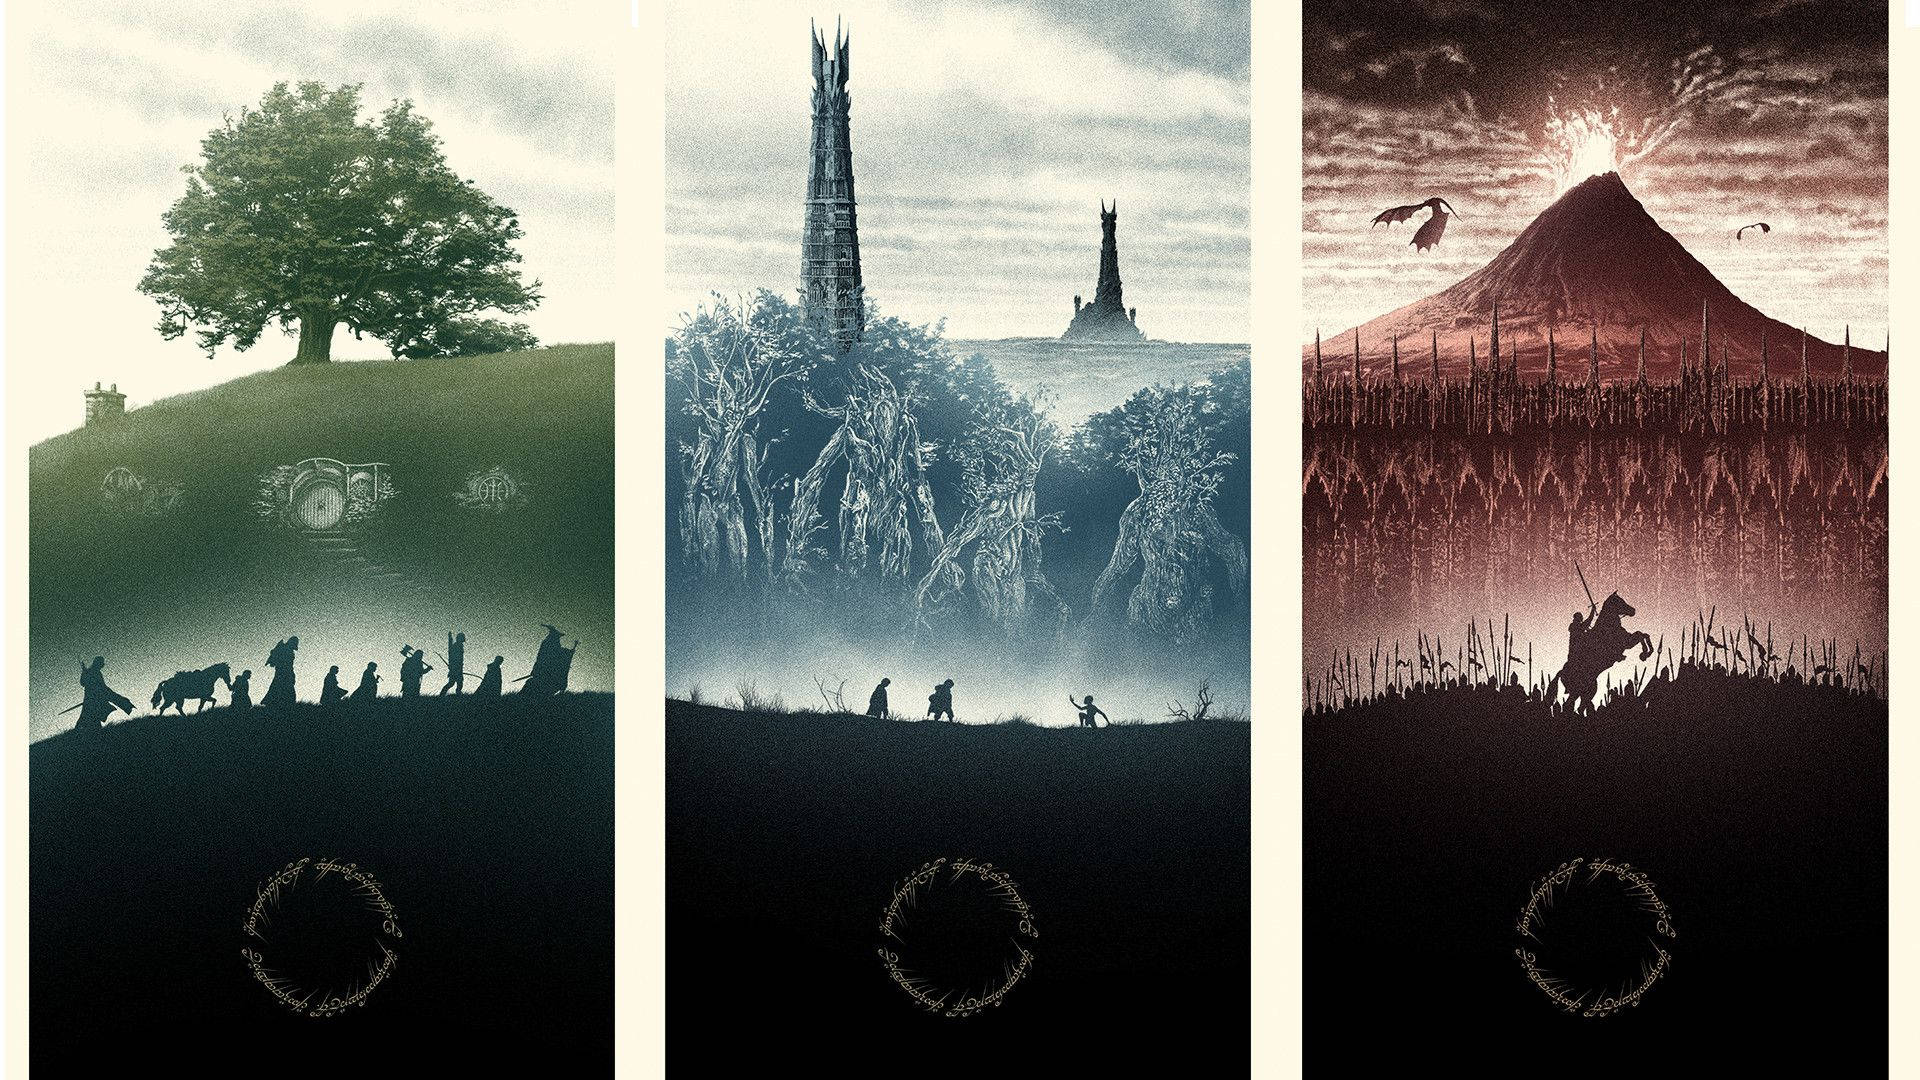 Fellowship of the Ring stand together for a doomed journey Wallpaper